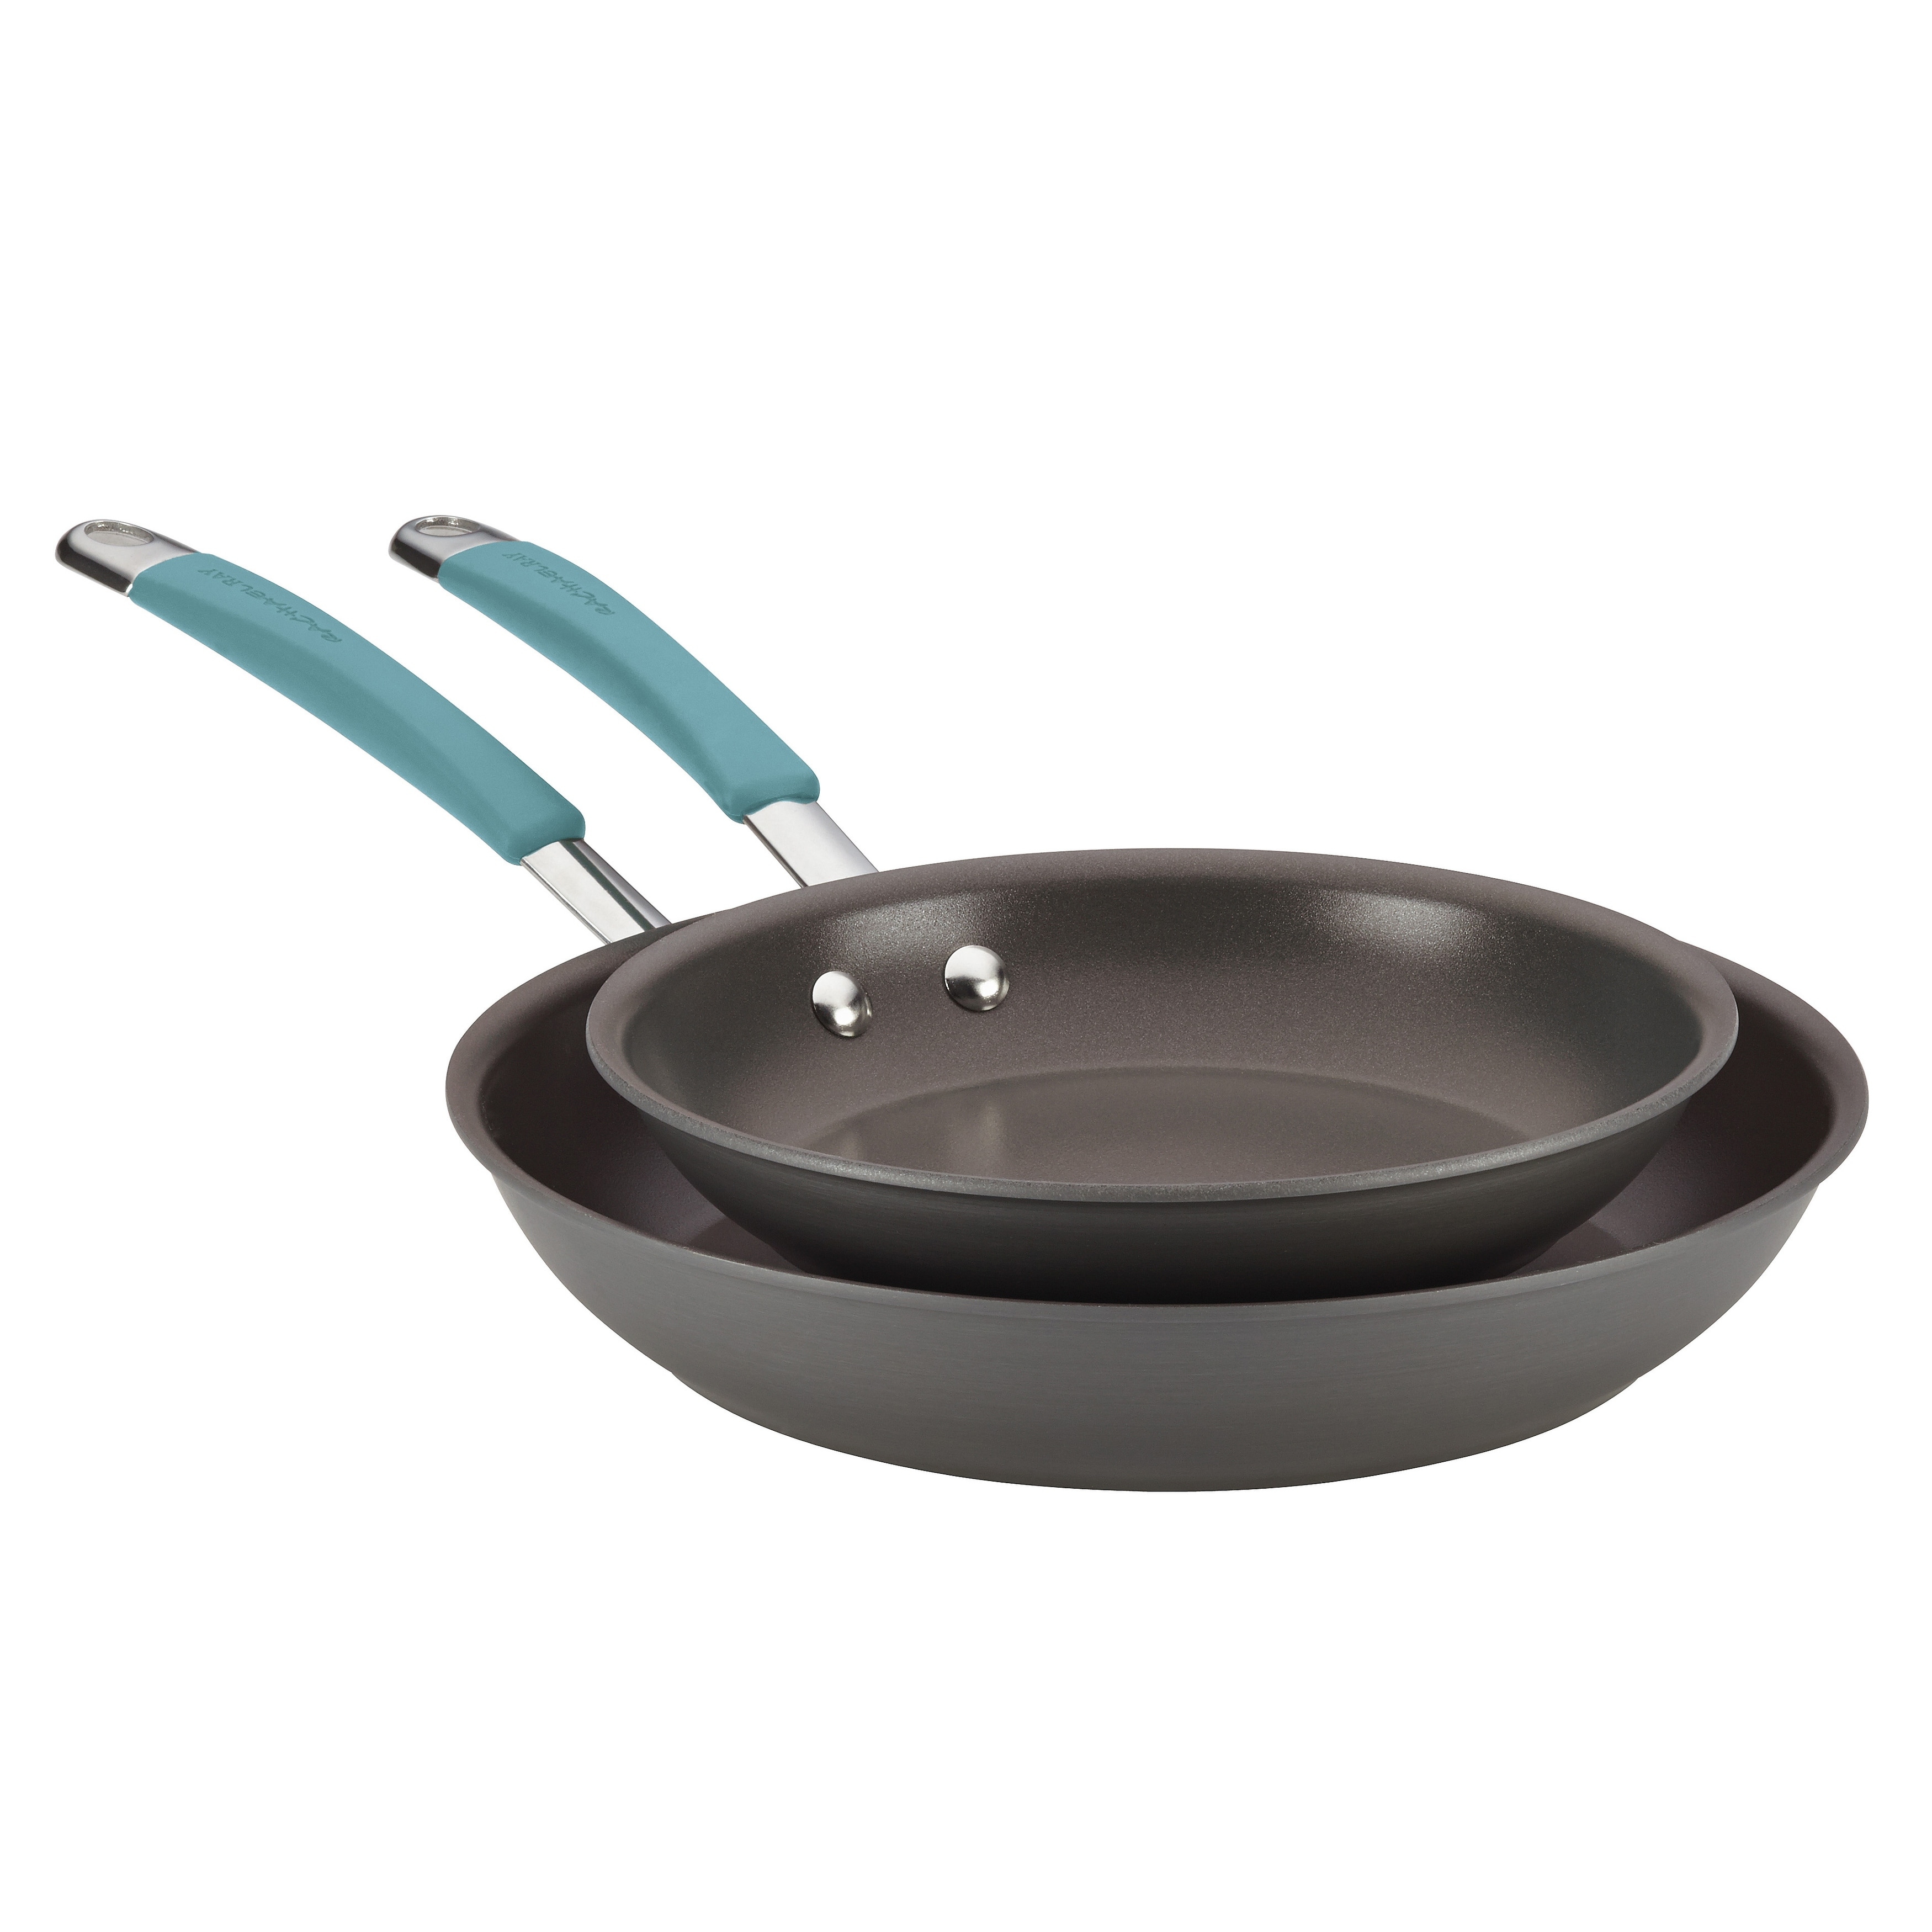 https://ak1.ostkcdn.com/images/products/is/images/direct/fc85afba2efab3d823ddfe2f6ceb030fb77de899/Rachael-Ray-Cucina-Hard-Anodized-Aluminum-Nonstick-Skillet-Set%2C-9.25-Inch-and-11.5-Inch%2C-Gray-with-Agave-Blue-Handles.jpg